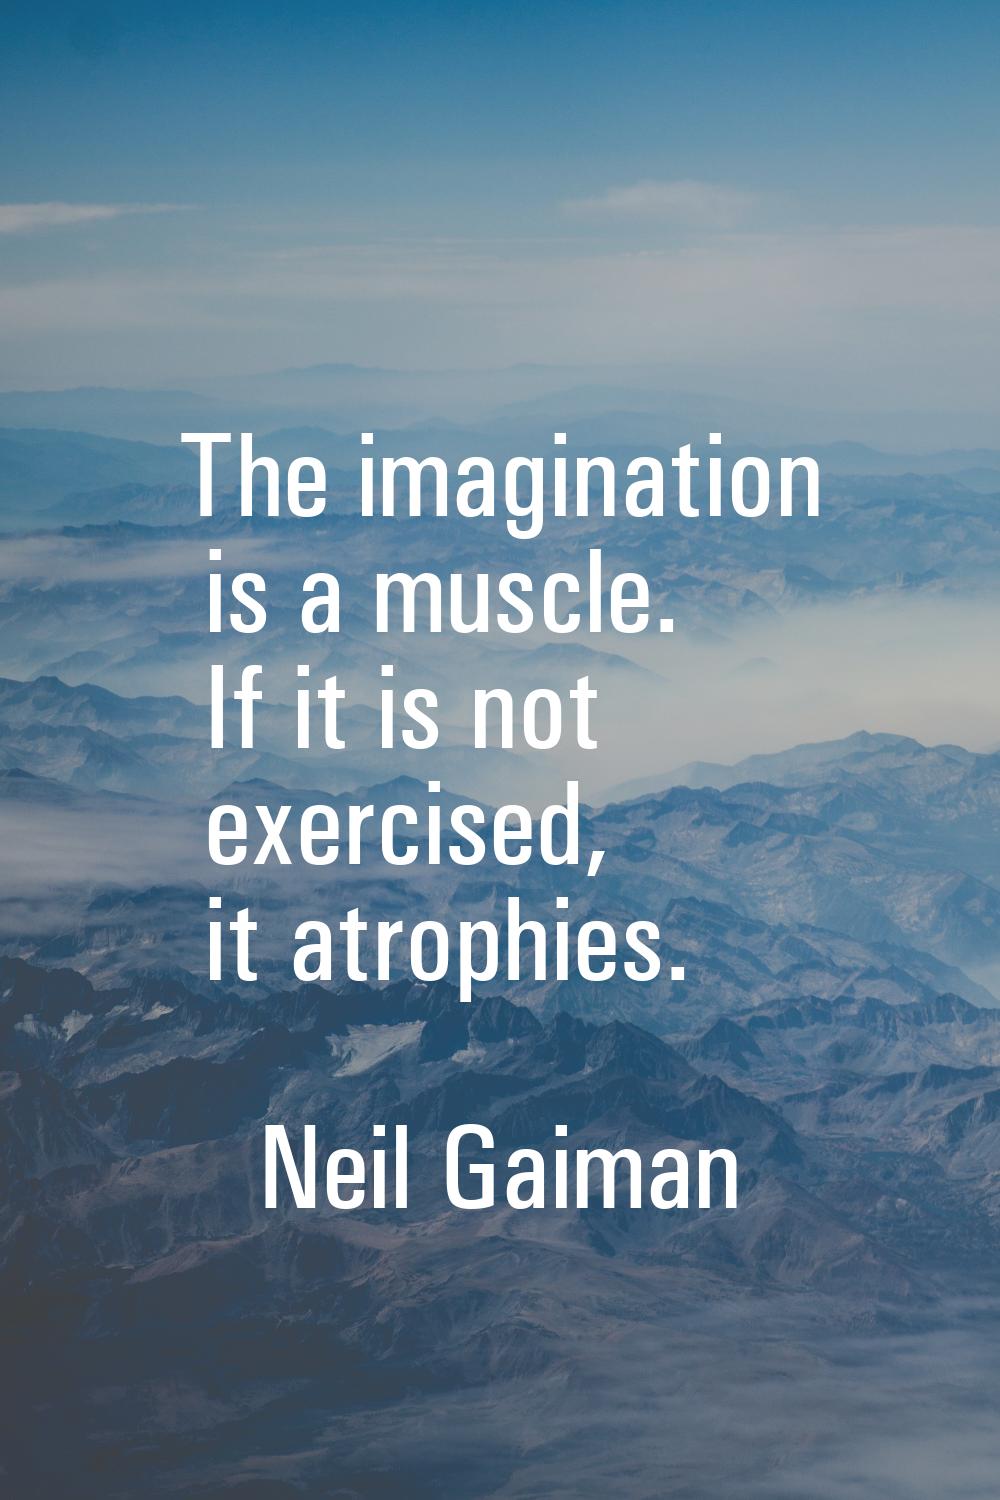 The imagination is a muscle. If it is not exercised, it atrophies.